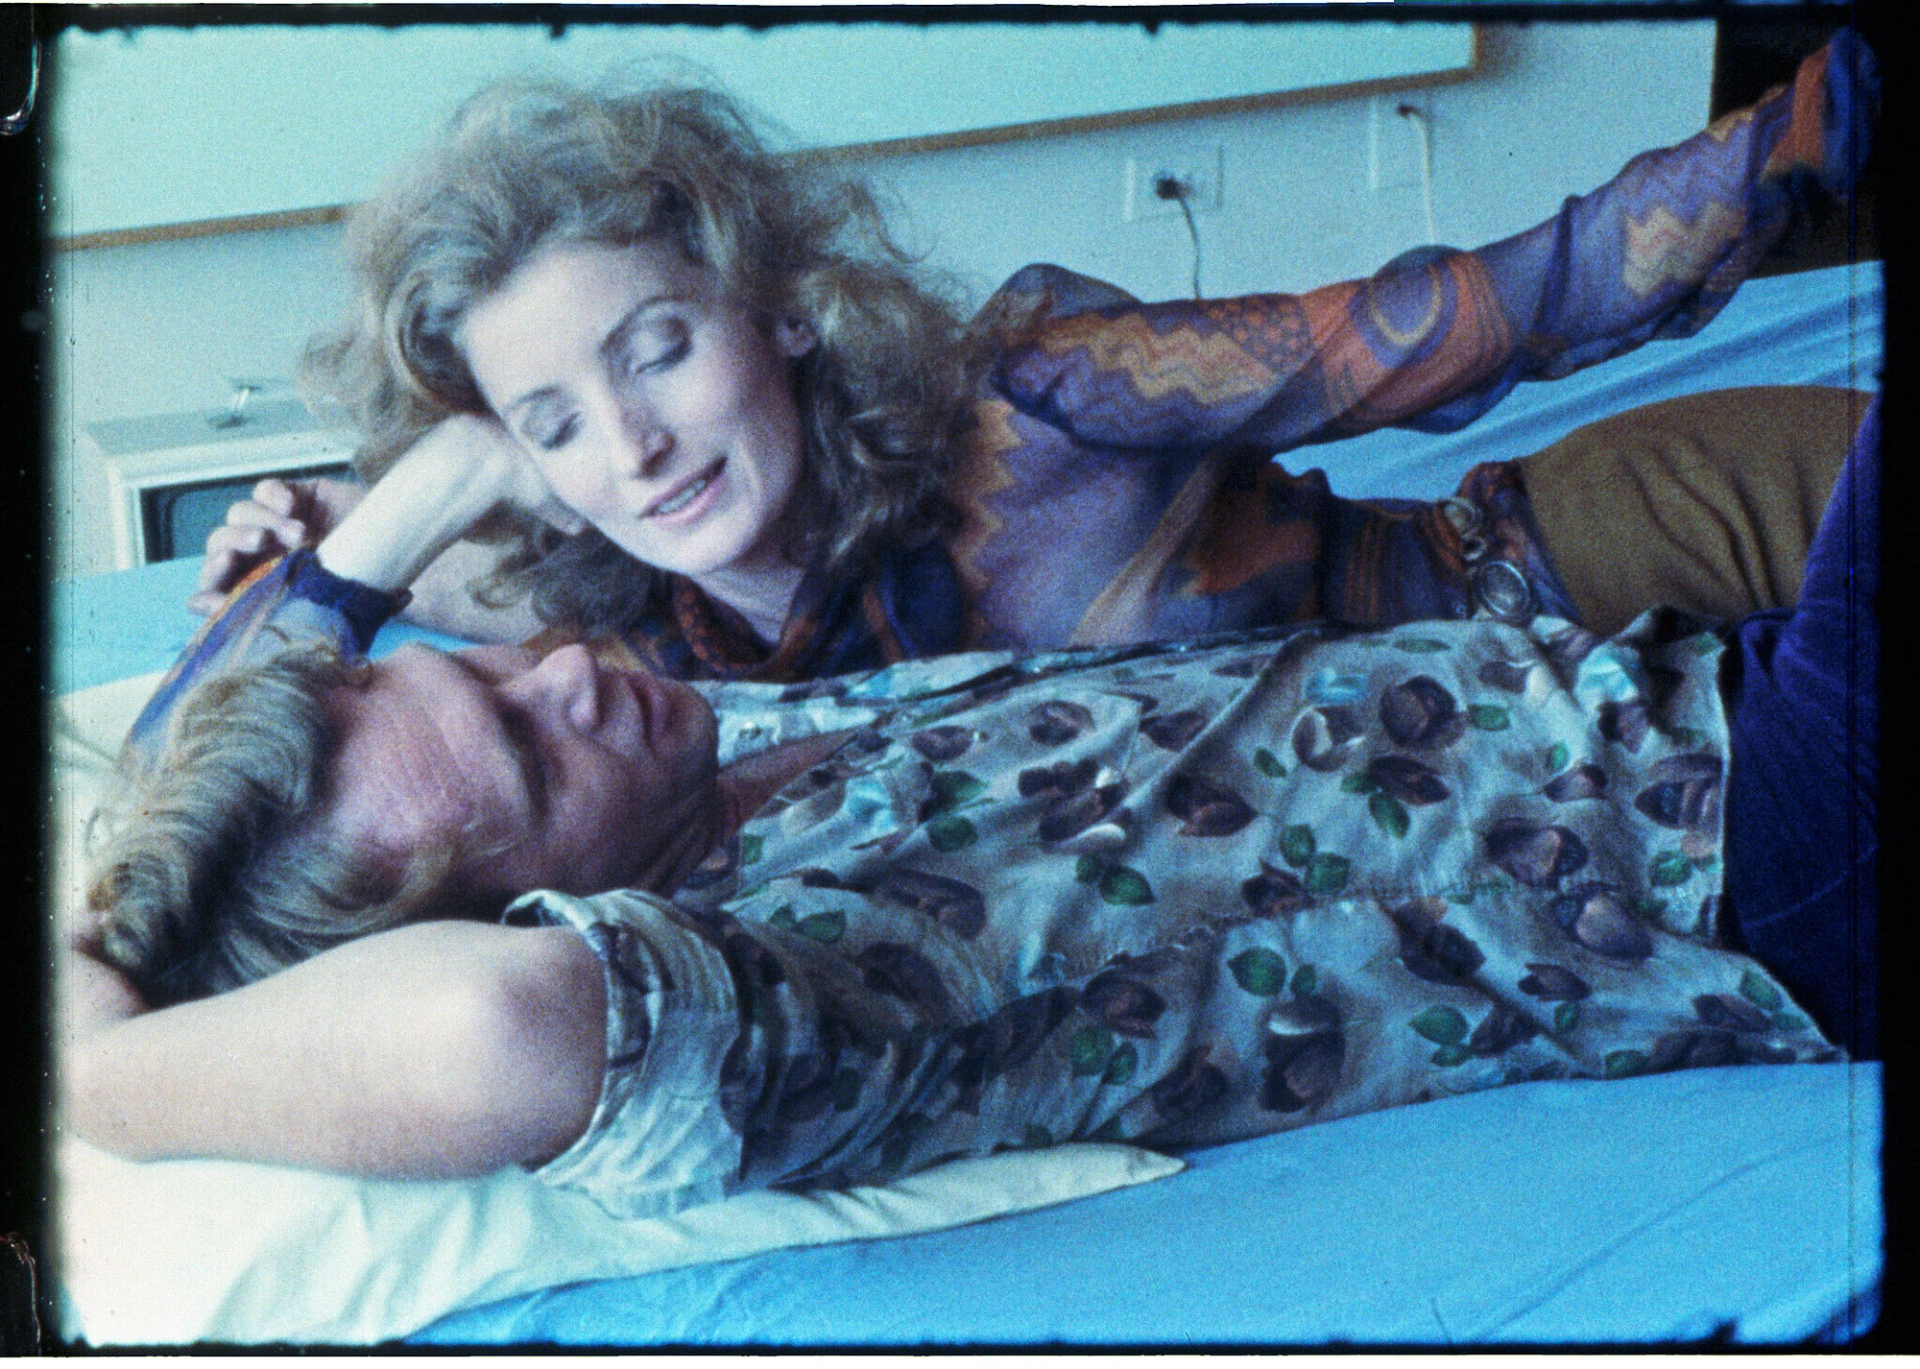 An image from Andy Warhol's Blue Movie film. It shows a couple lying on a bed, as the woman gazes into the man's face.